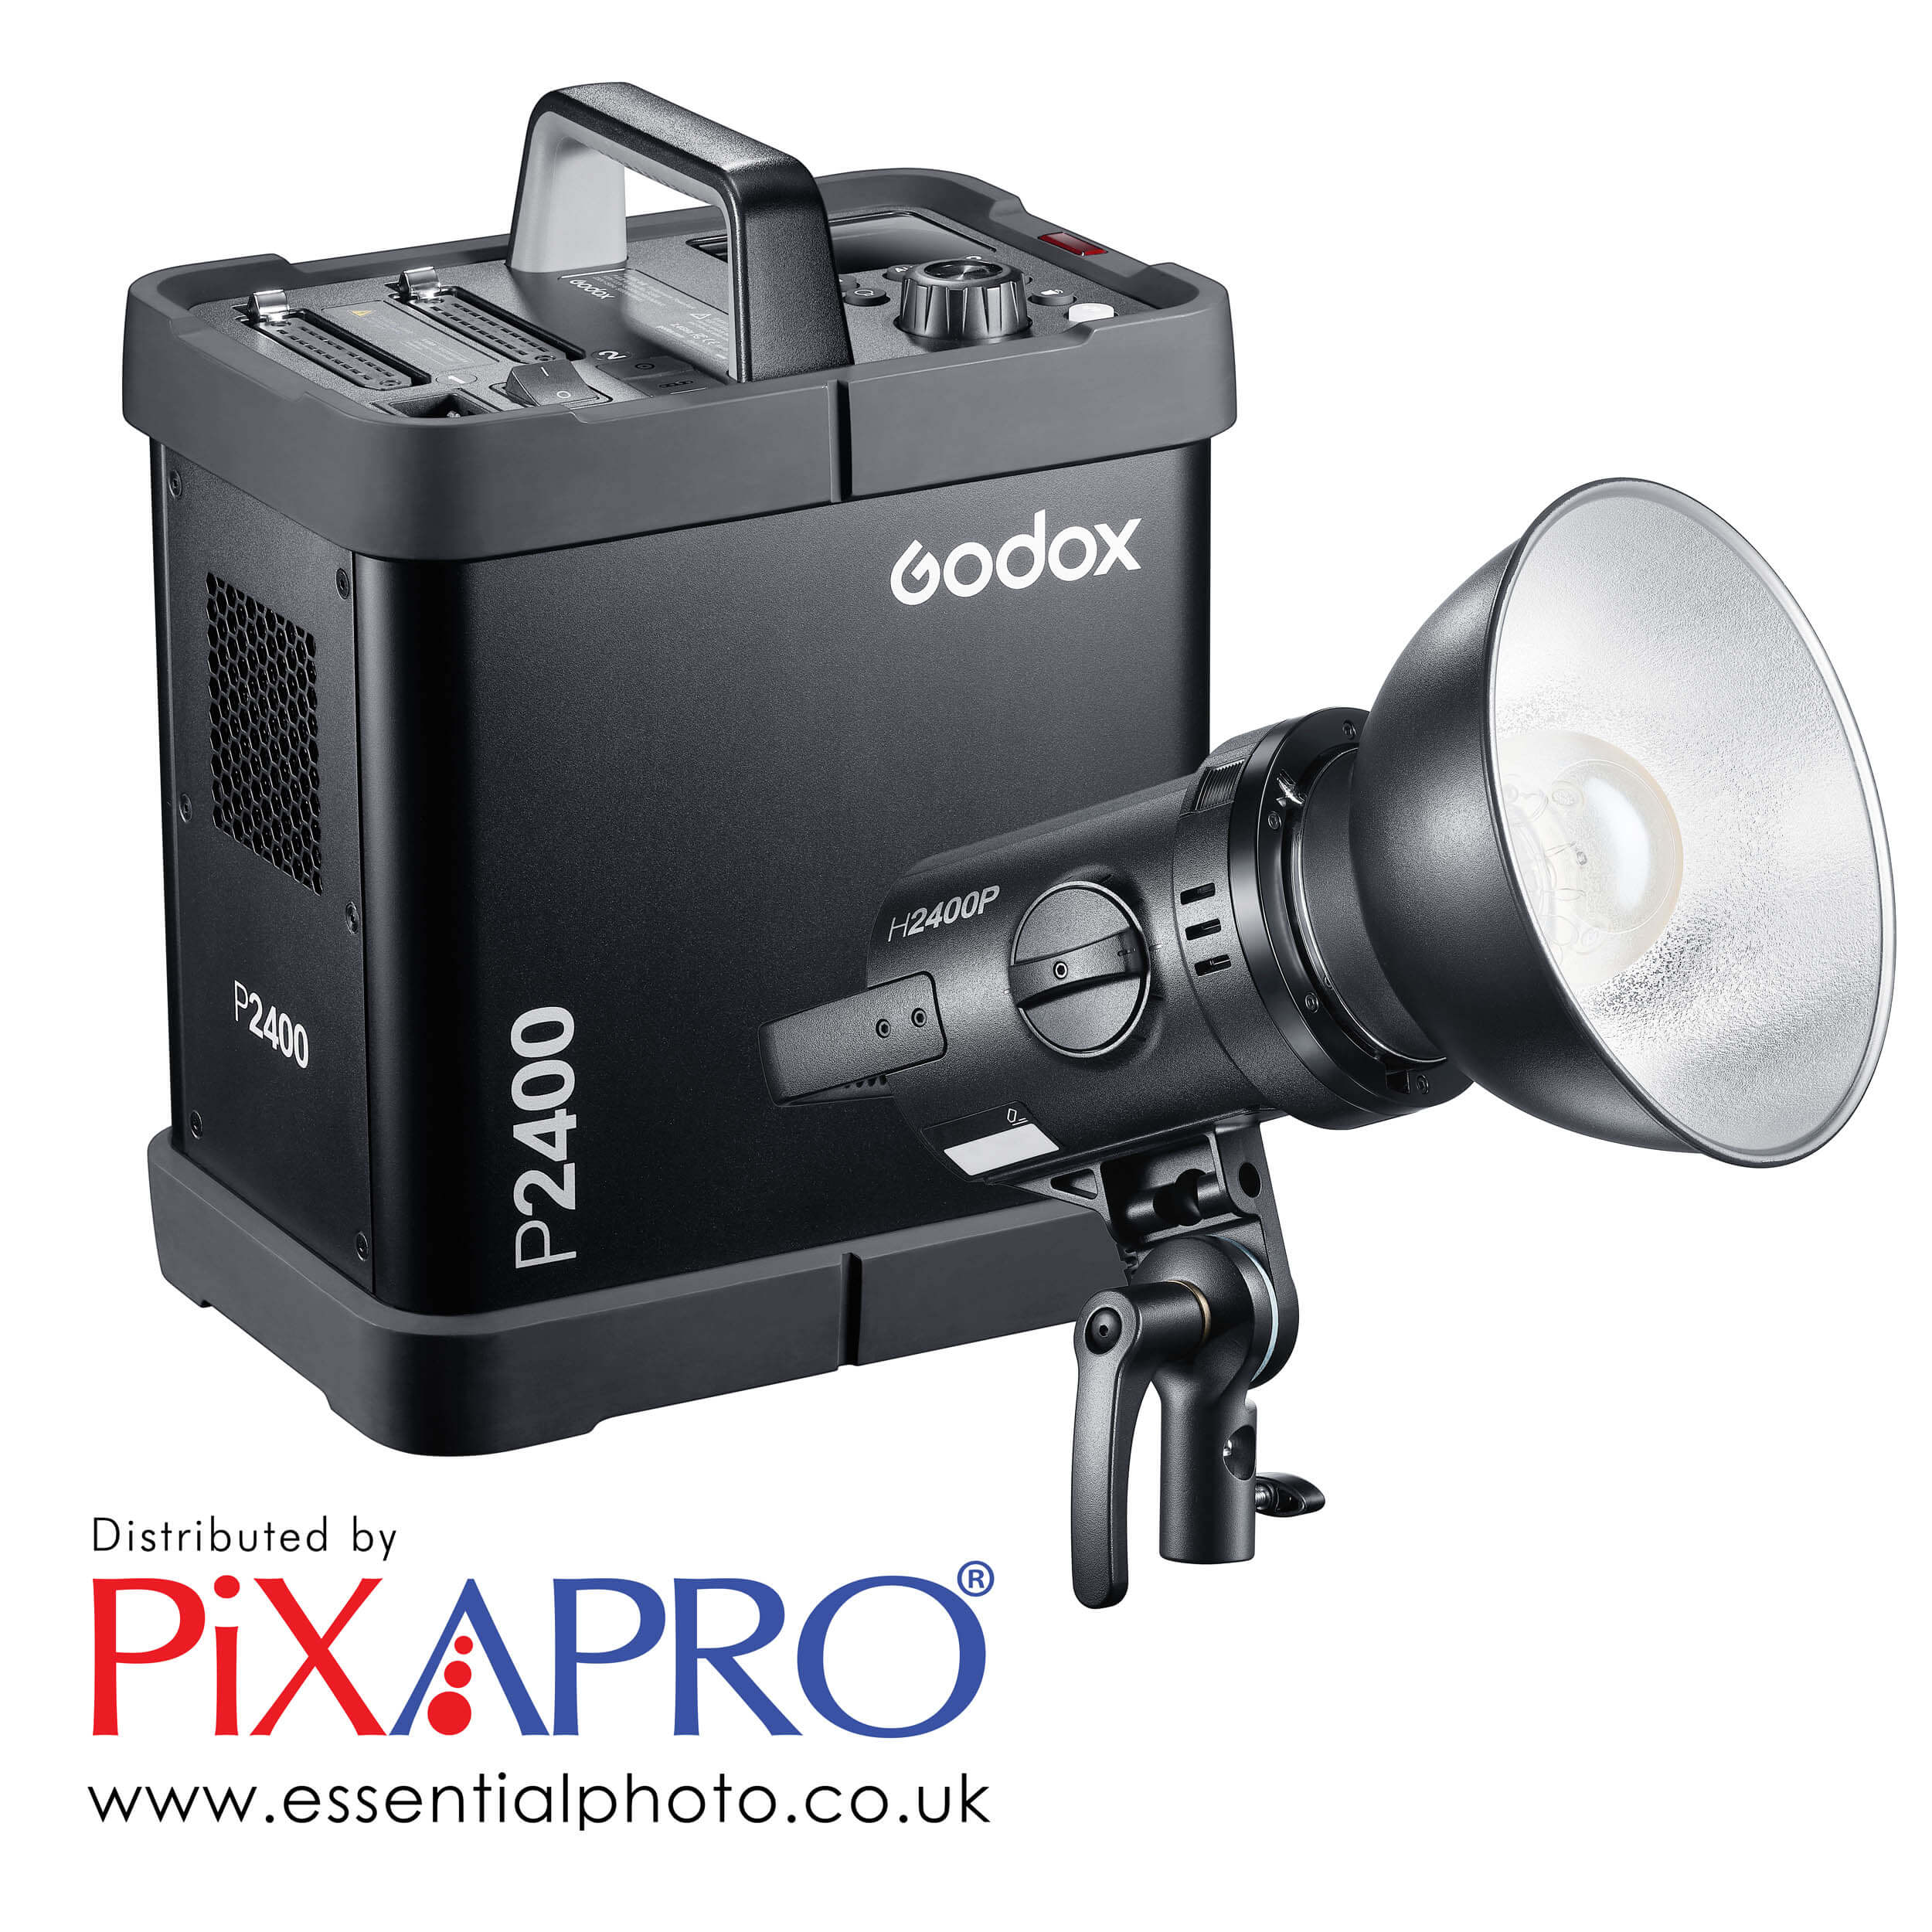 2-In-1 Godox P2400 Single Pack and Head Flash Kit By PixaPro 